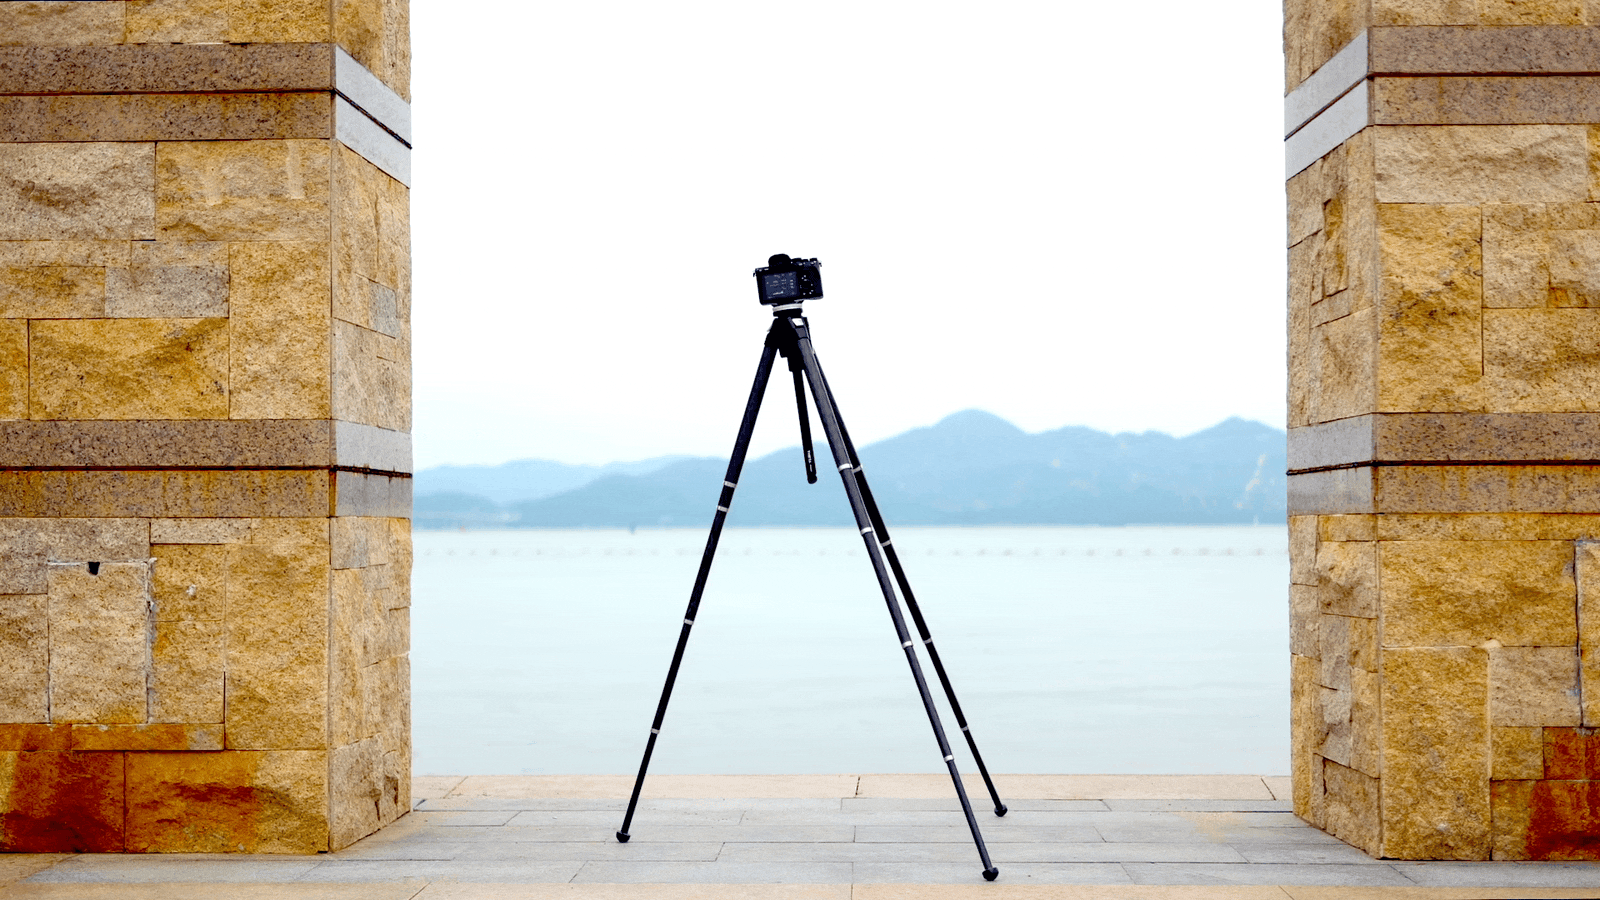 Benro has designed what could be the most amazing tripod ever conceived